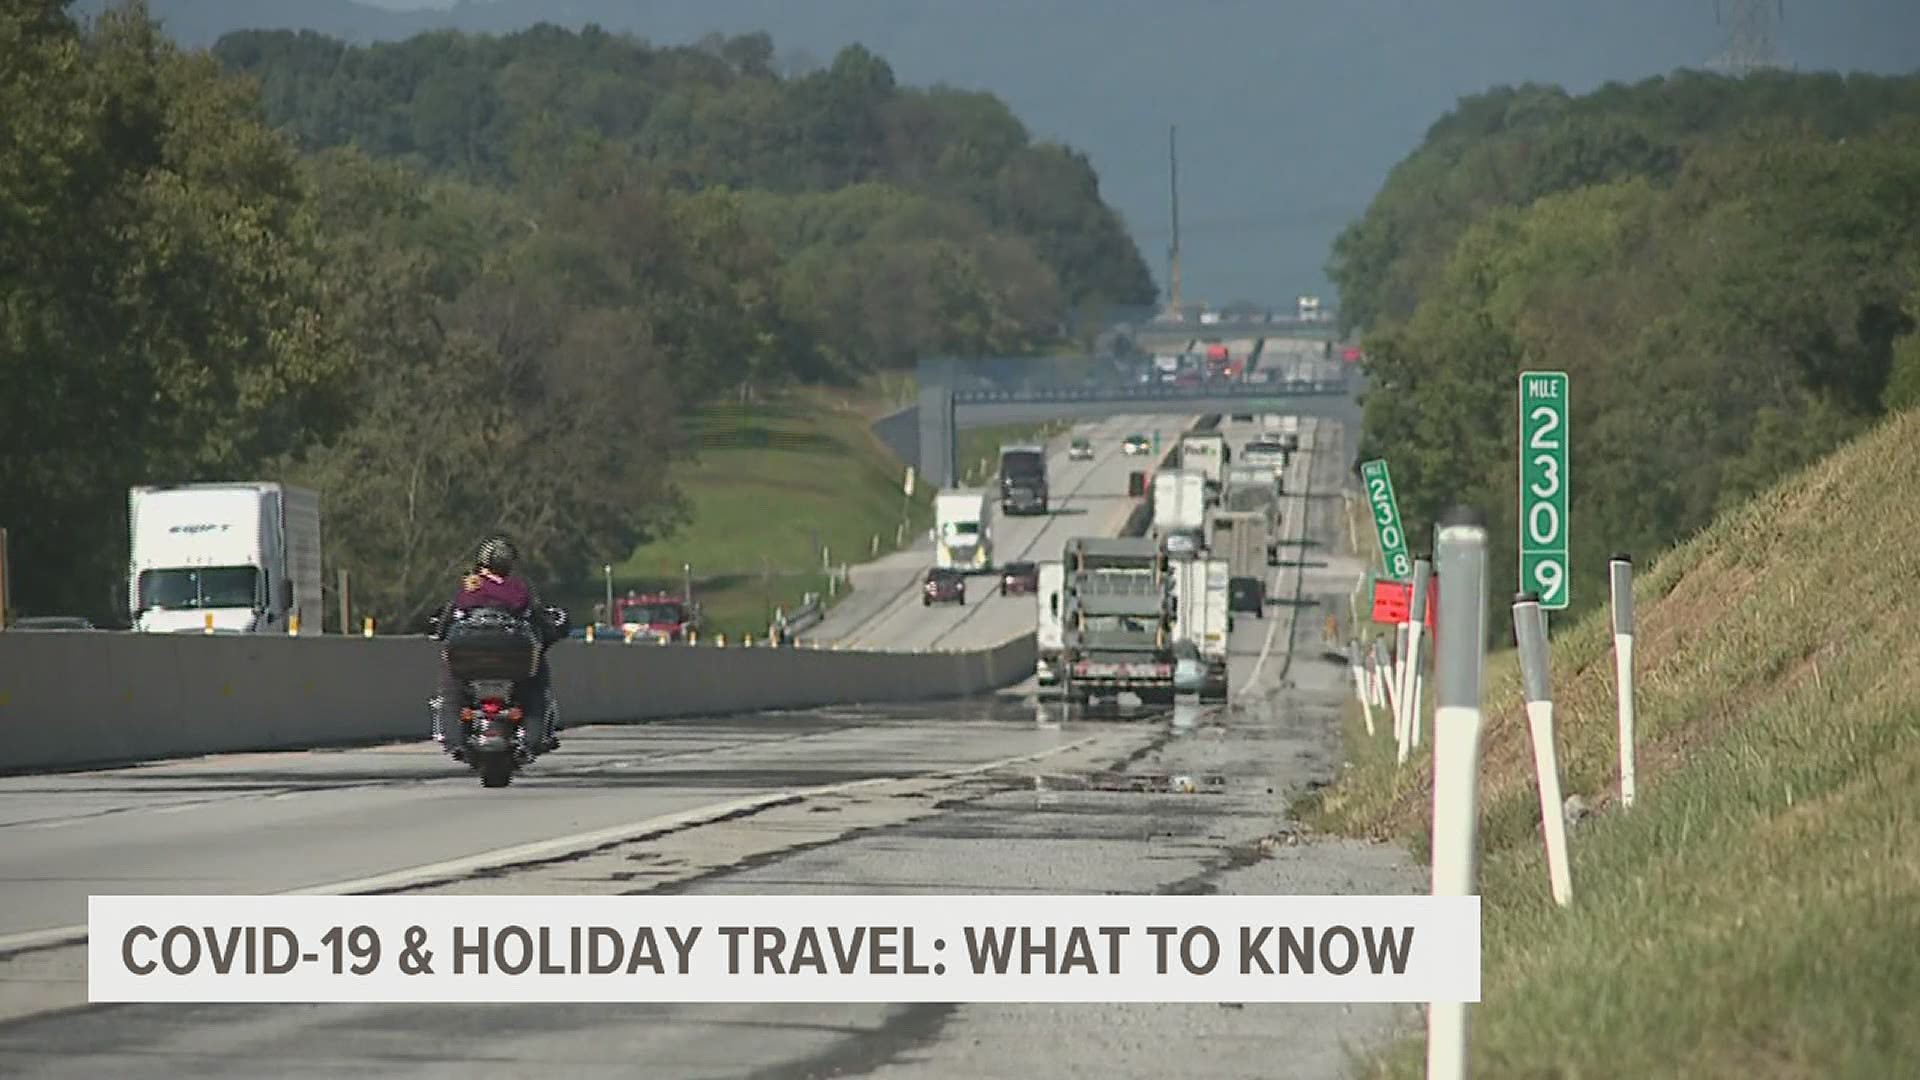 AAA said they are expecting a 10% drop in all travel this Thanksgiving. They said they haven't seen anything like this since the 2008 recession.